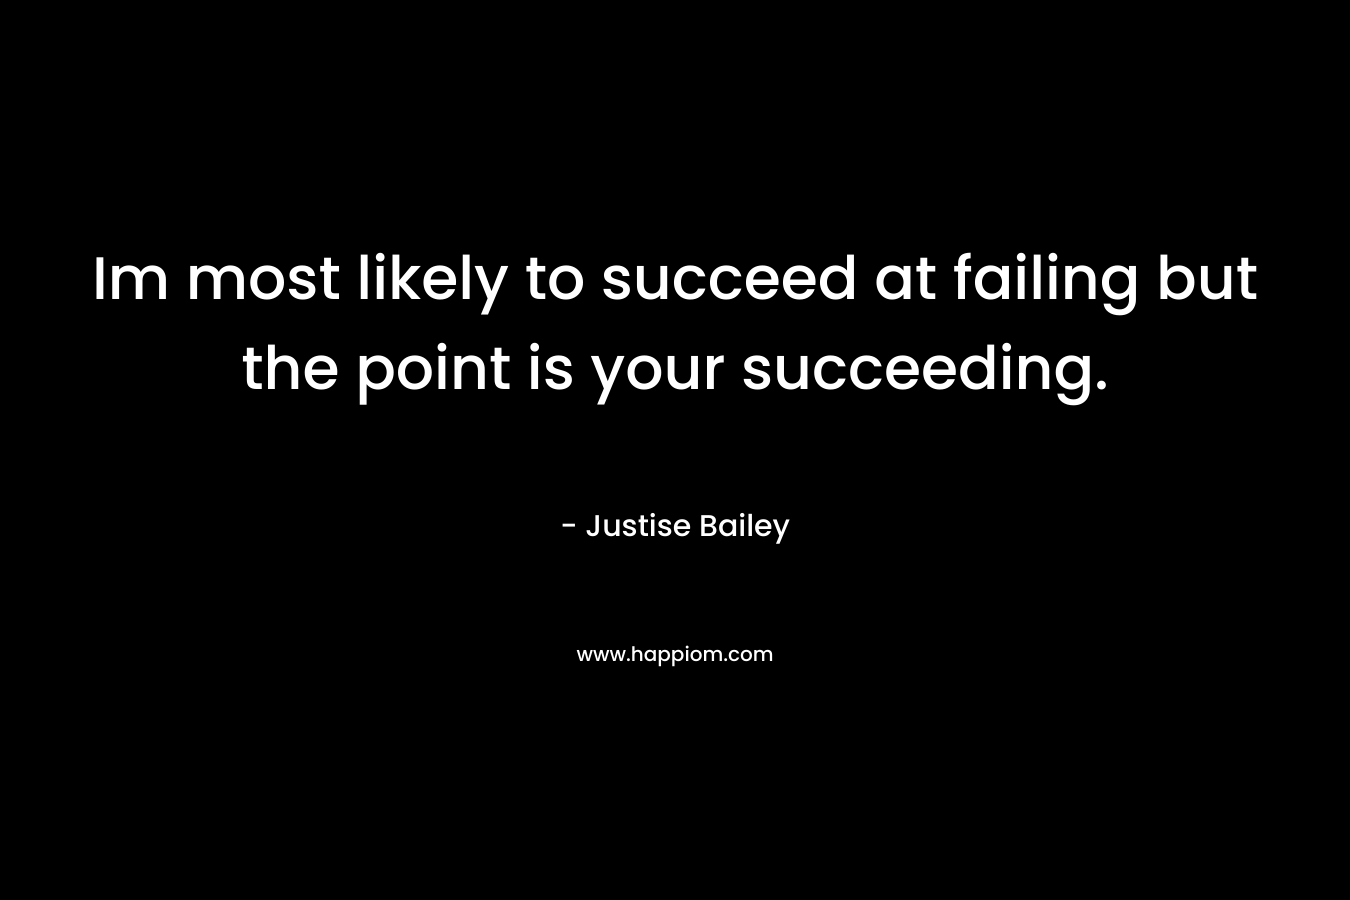 Im most likely to succeed at failing but the point is your succeeding.